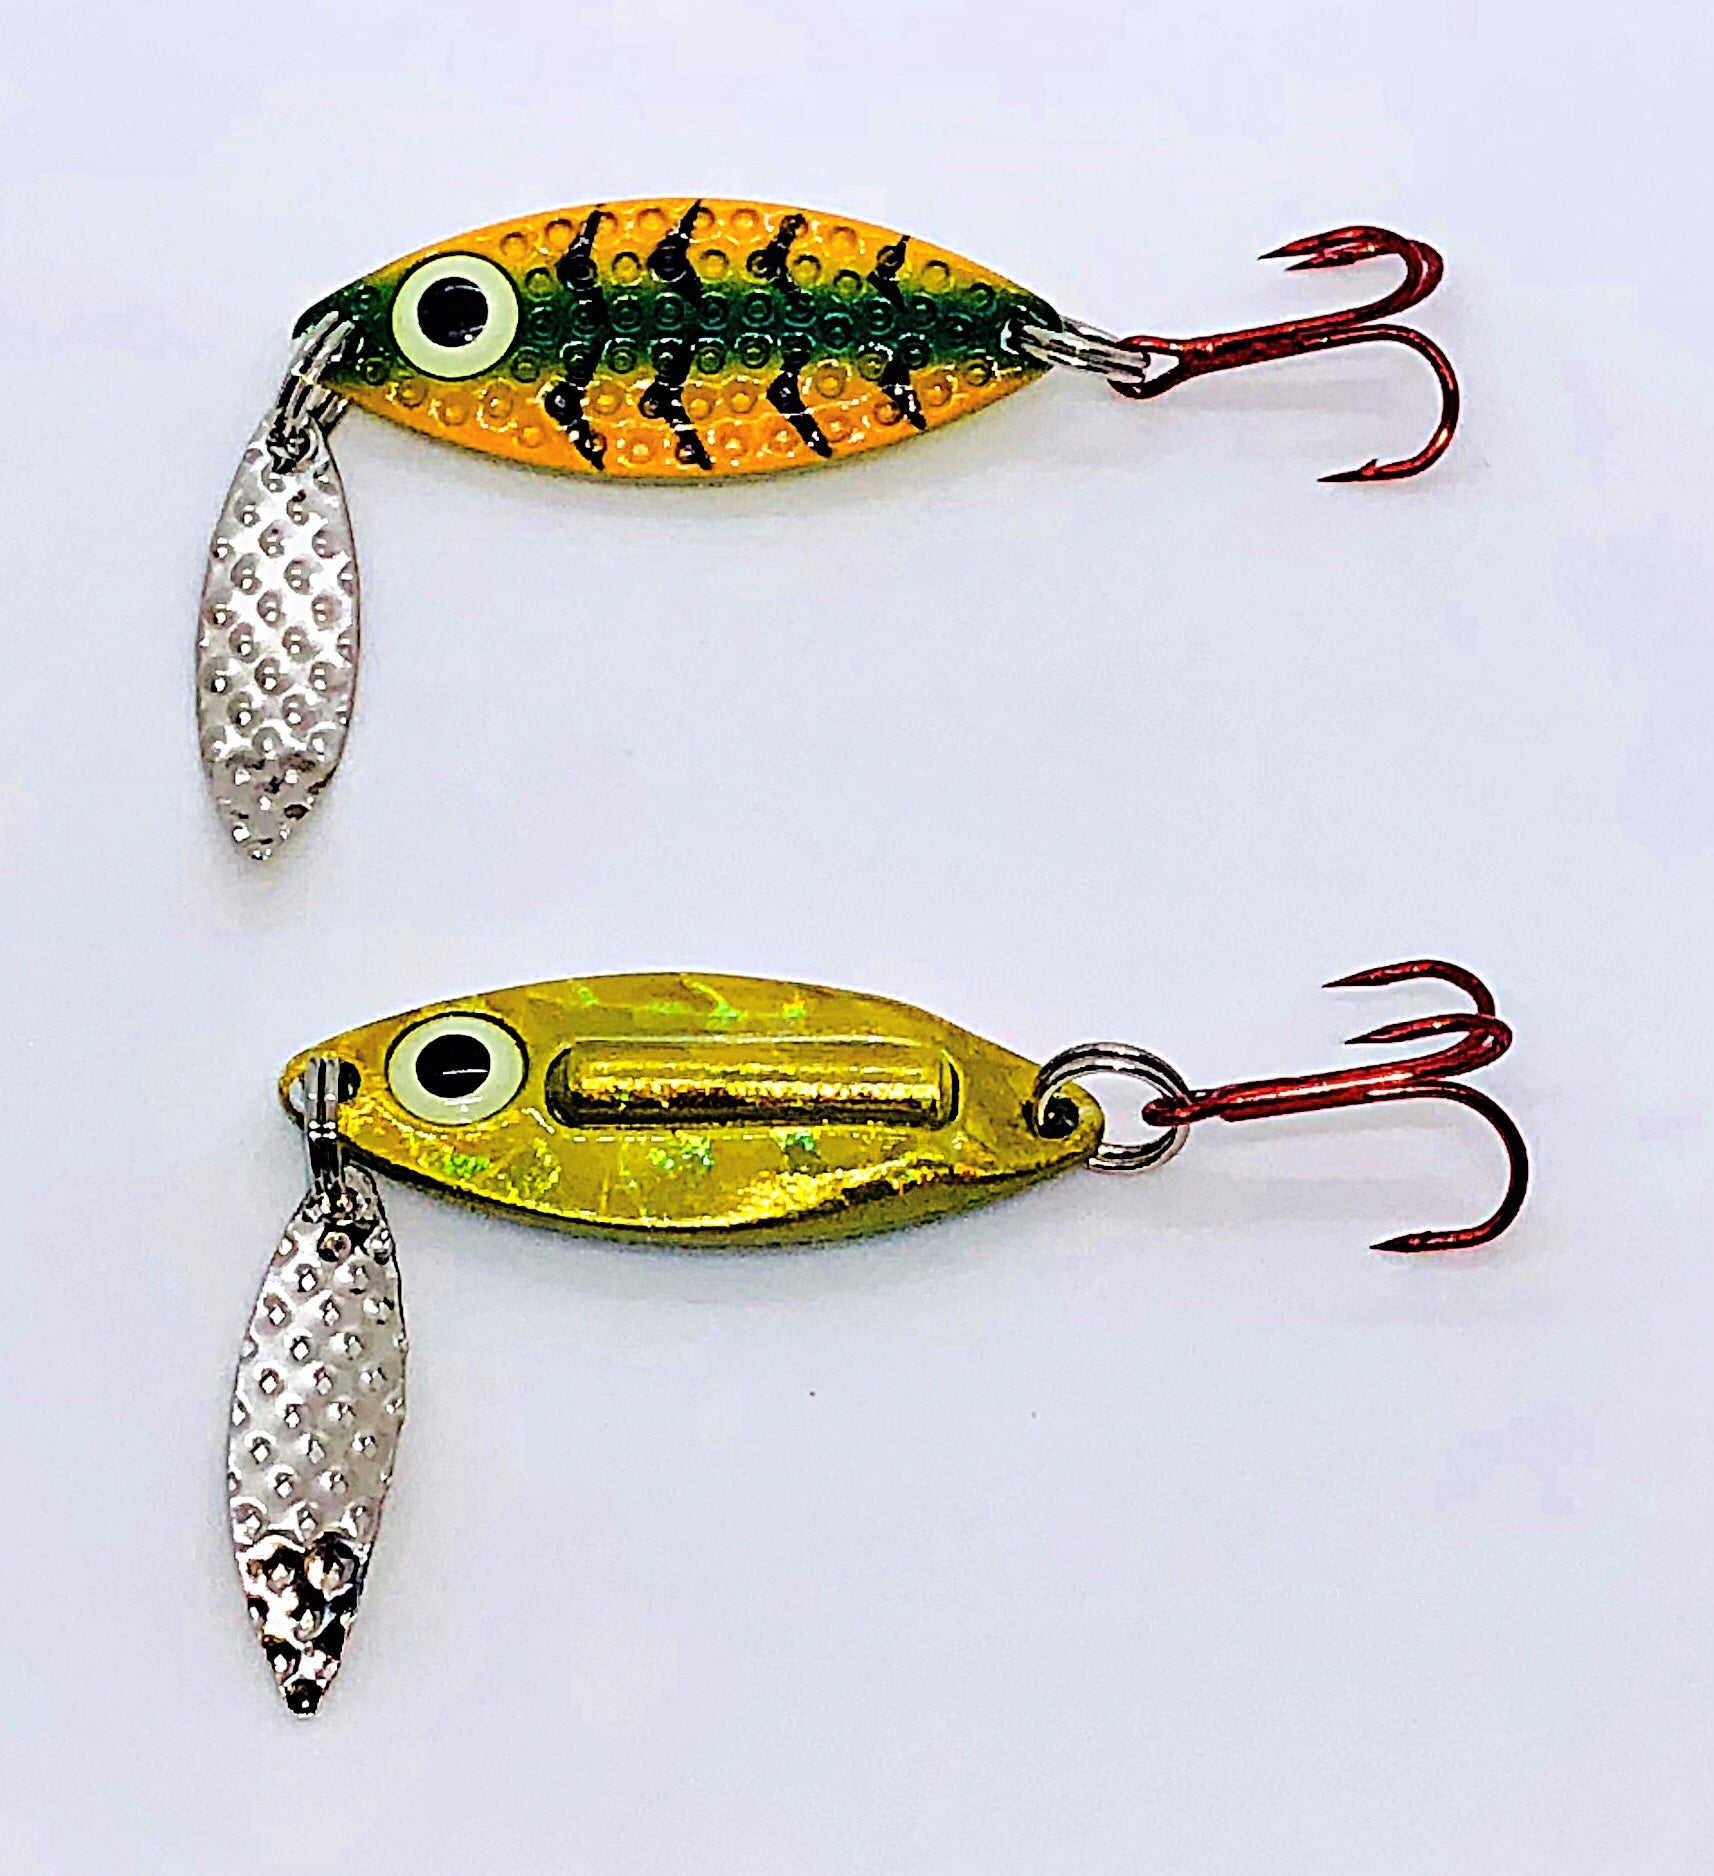 POPULAR LADDERBACK DESIGN NOW AVAILABLE: ARROWHEAD LADDERBACK SPARKLE HOLO  FISHING LURE TAPE DIE CUTS www.fishingluretape.com Available in 7 Sizes:  3, 4, 5, 6, 7, 8, 9 Available in Holographic Sparkle Lure Tape